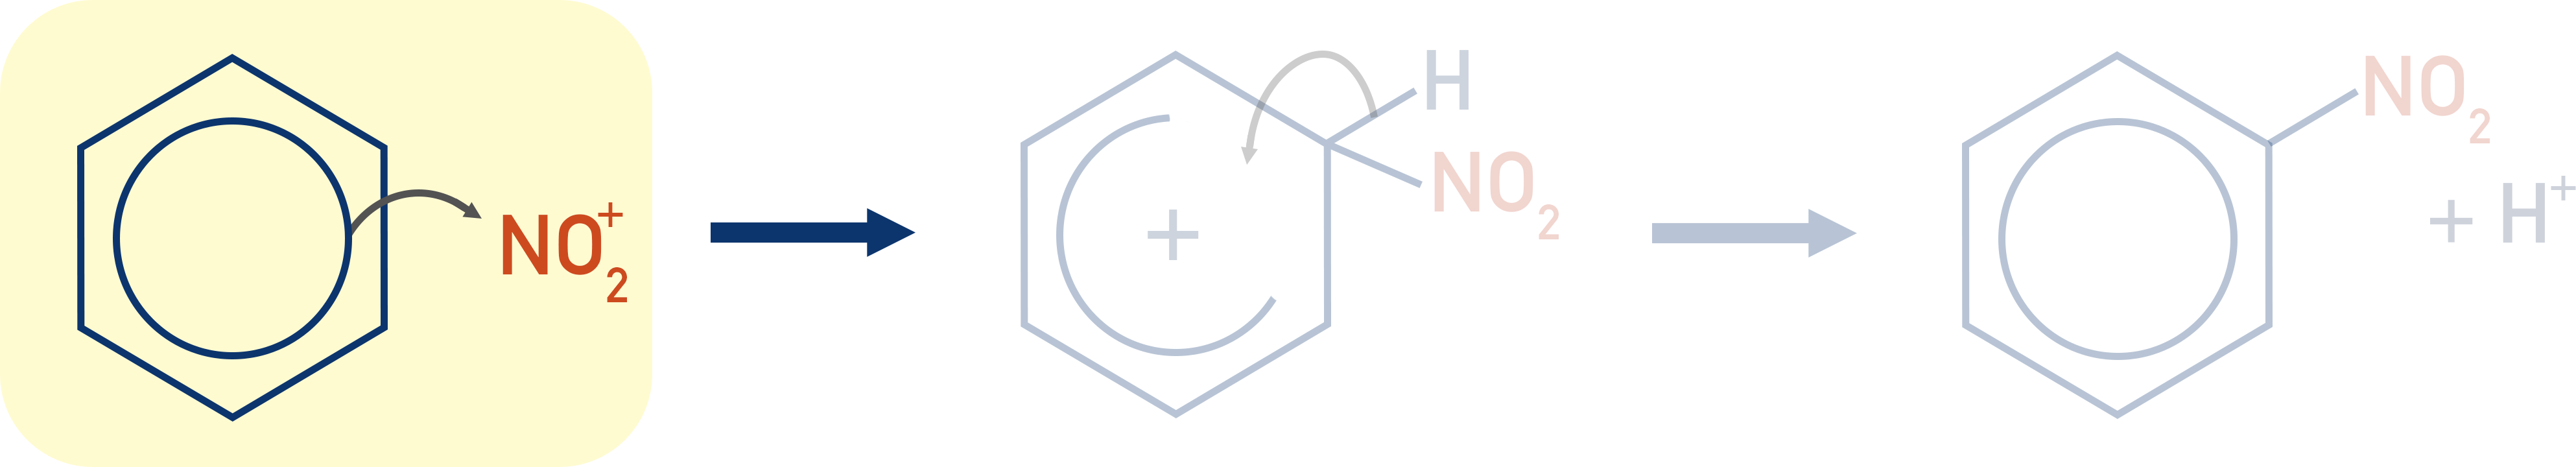 nitration of benzene mechanism first step electrophilic substitution